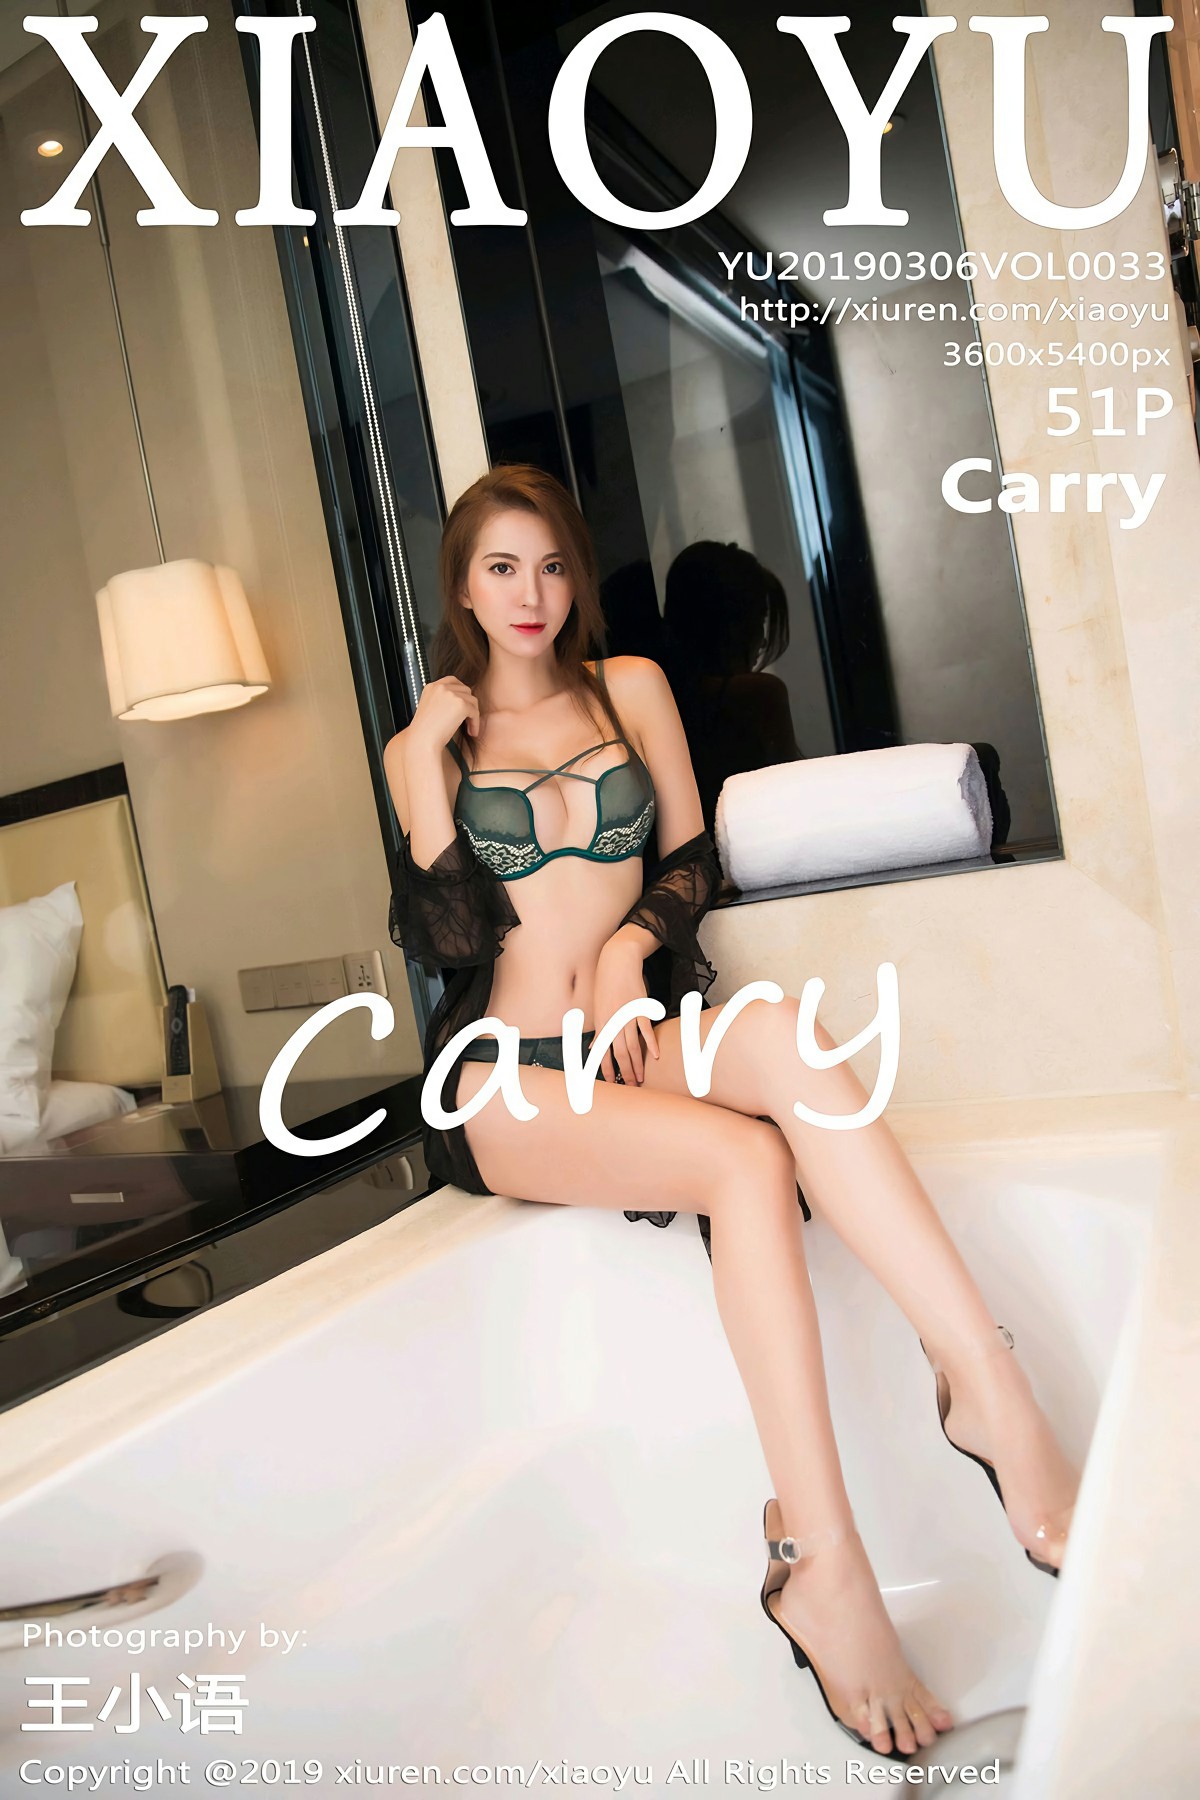 [XIAOYU语画界]2019.03.06 VOL.033 <strong>Carry</strong>